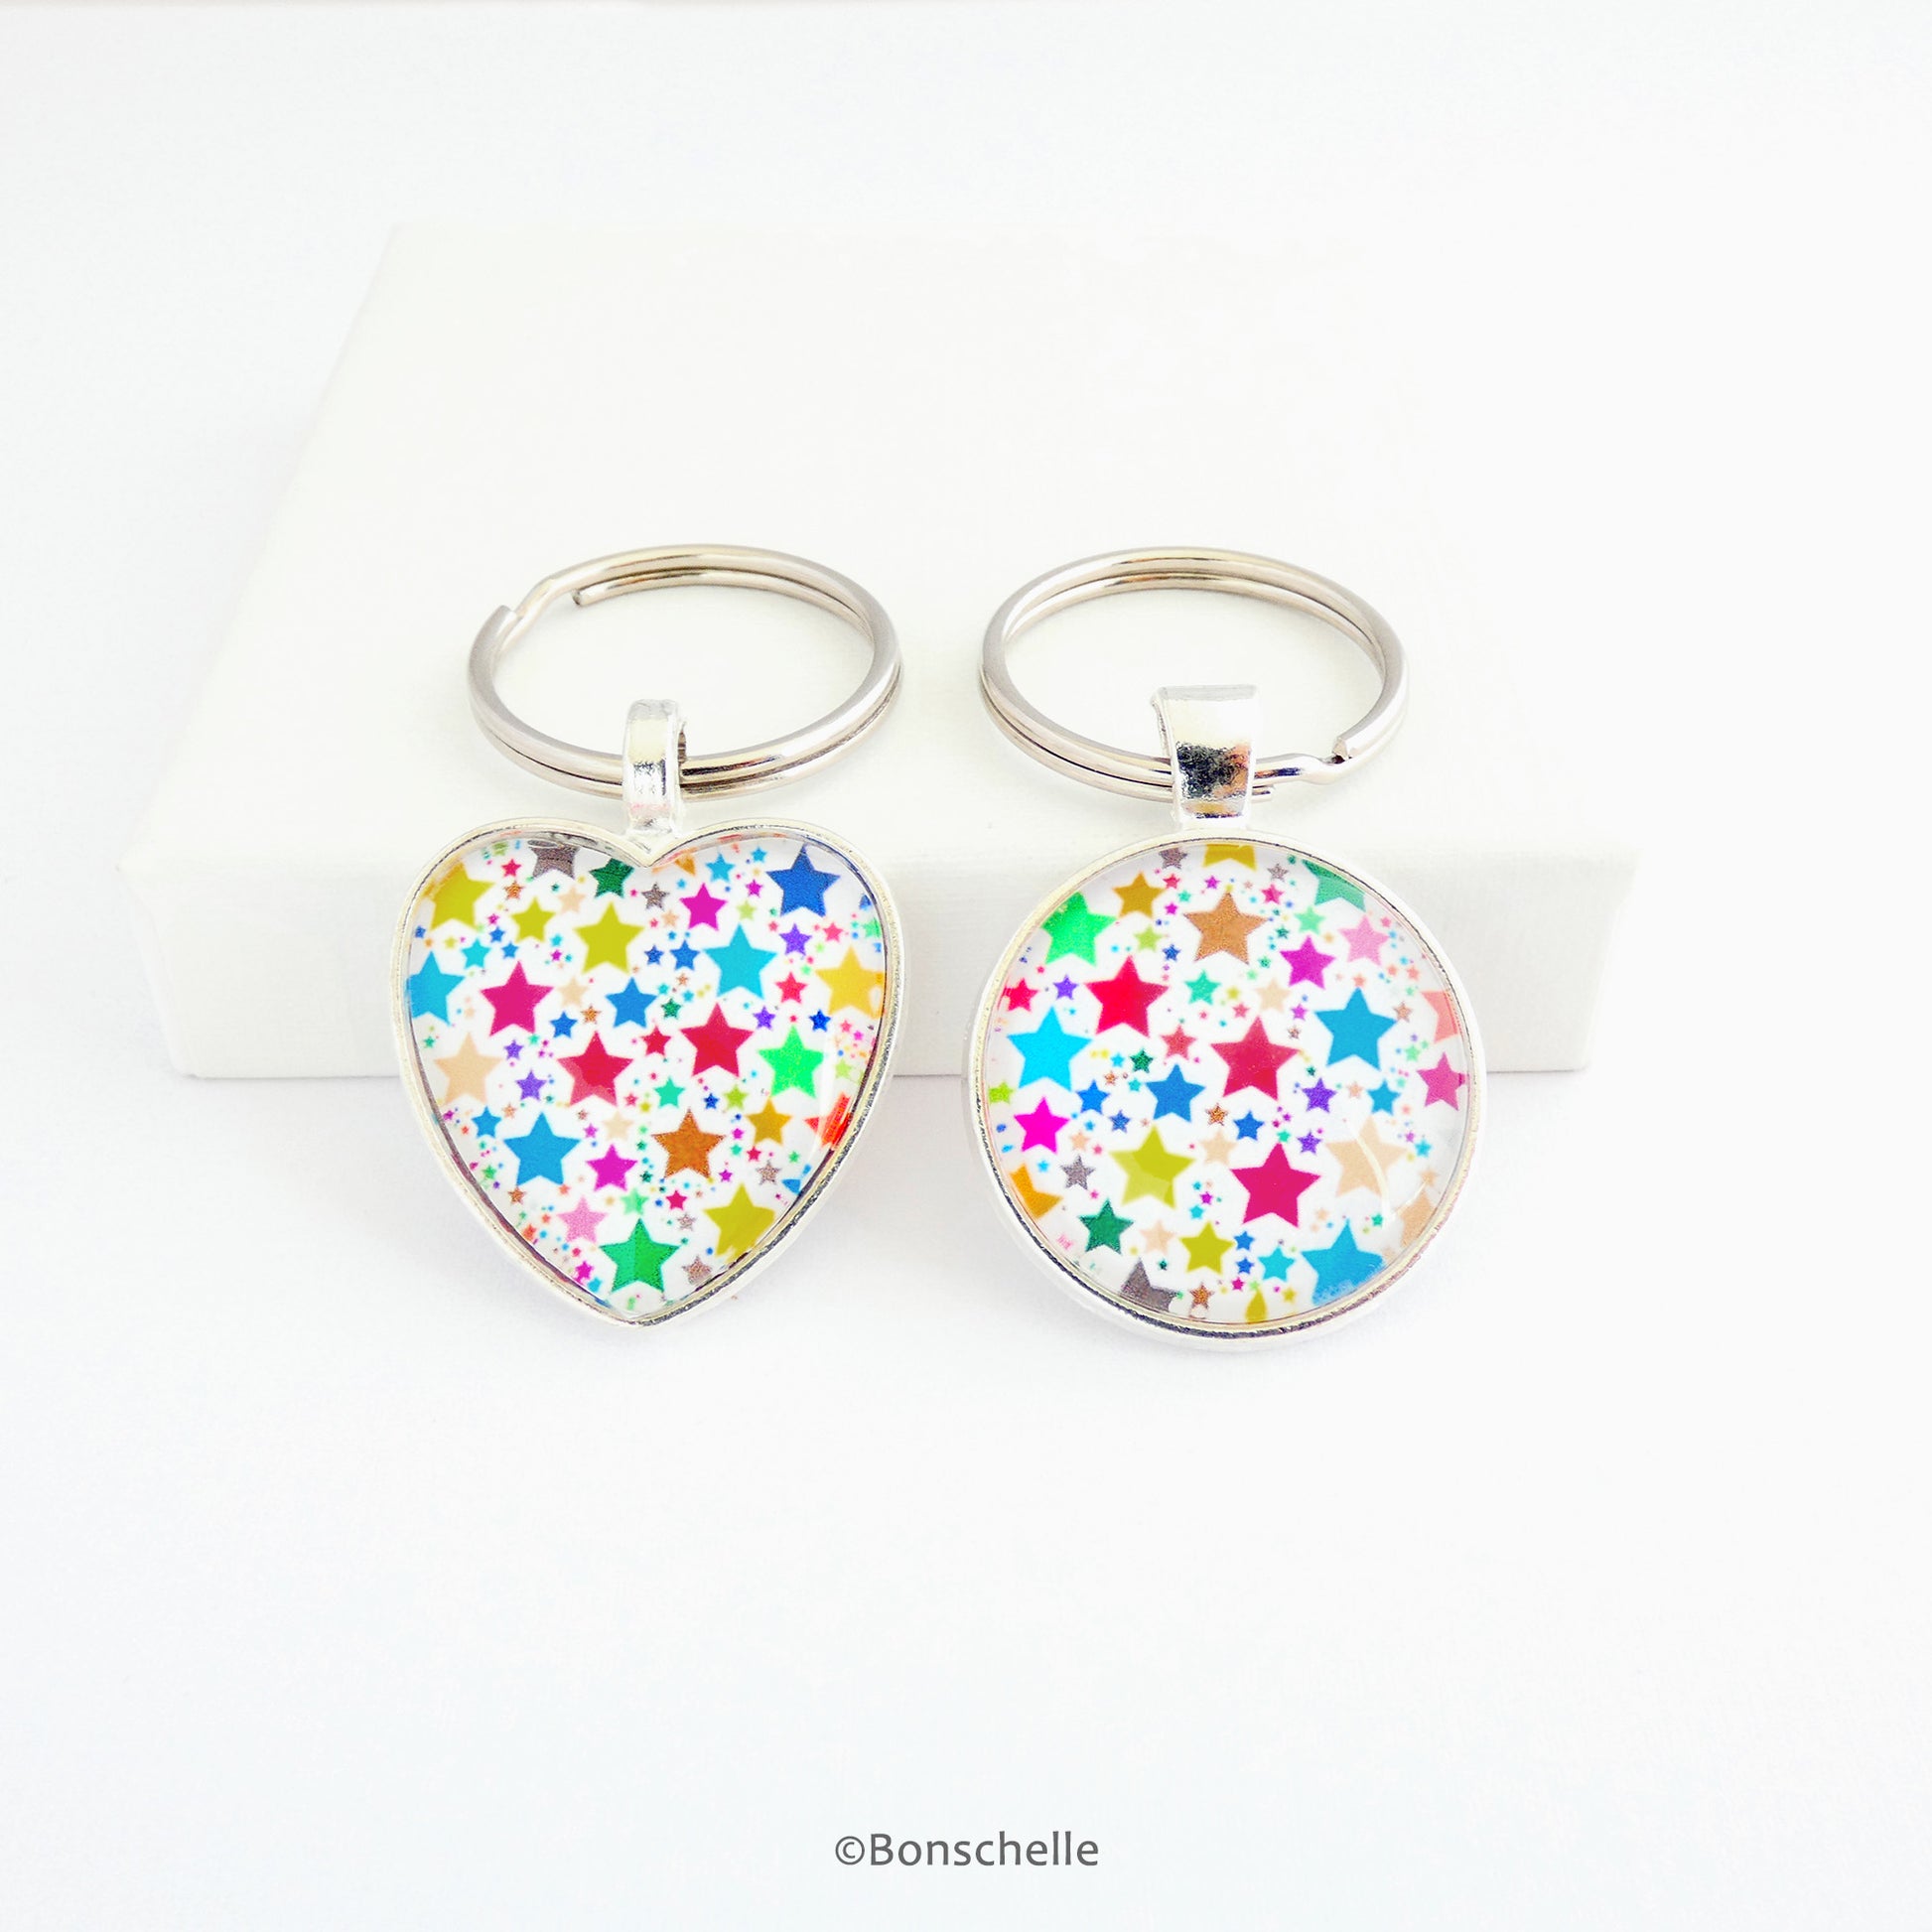 Heart shaped and a round shaped silver toned metal keyring with a colourful star pattern design capped wtih a clear glass cabochon.